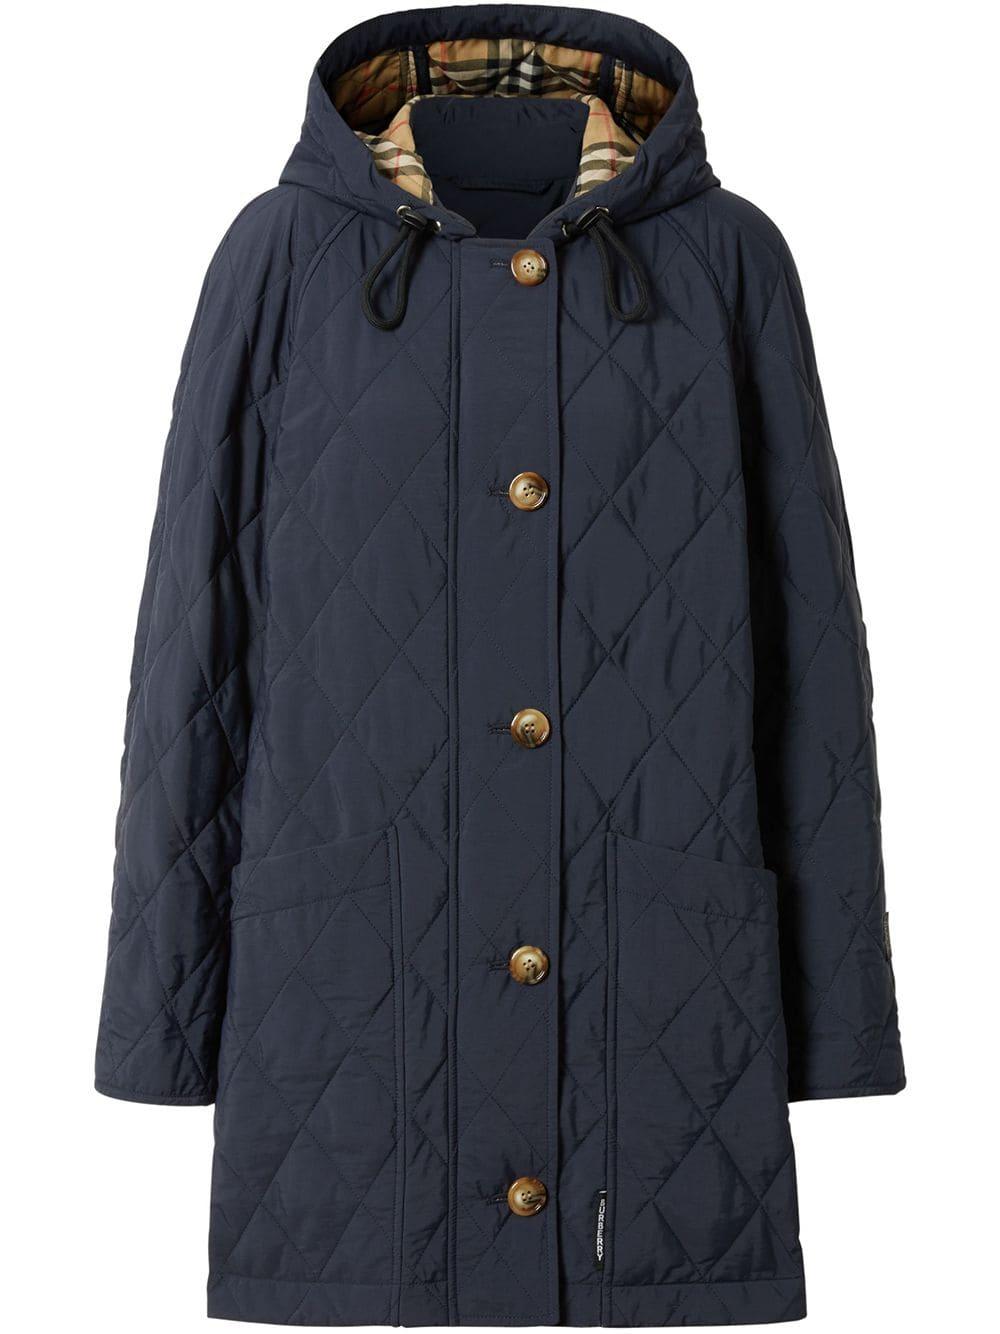 Burberry Cotton Diamond Quilted Thermoregulated Hooded Coat in Blue - Lyst